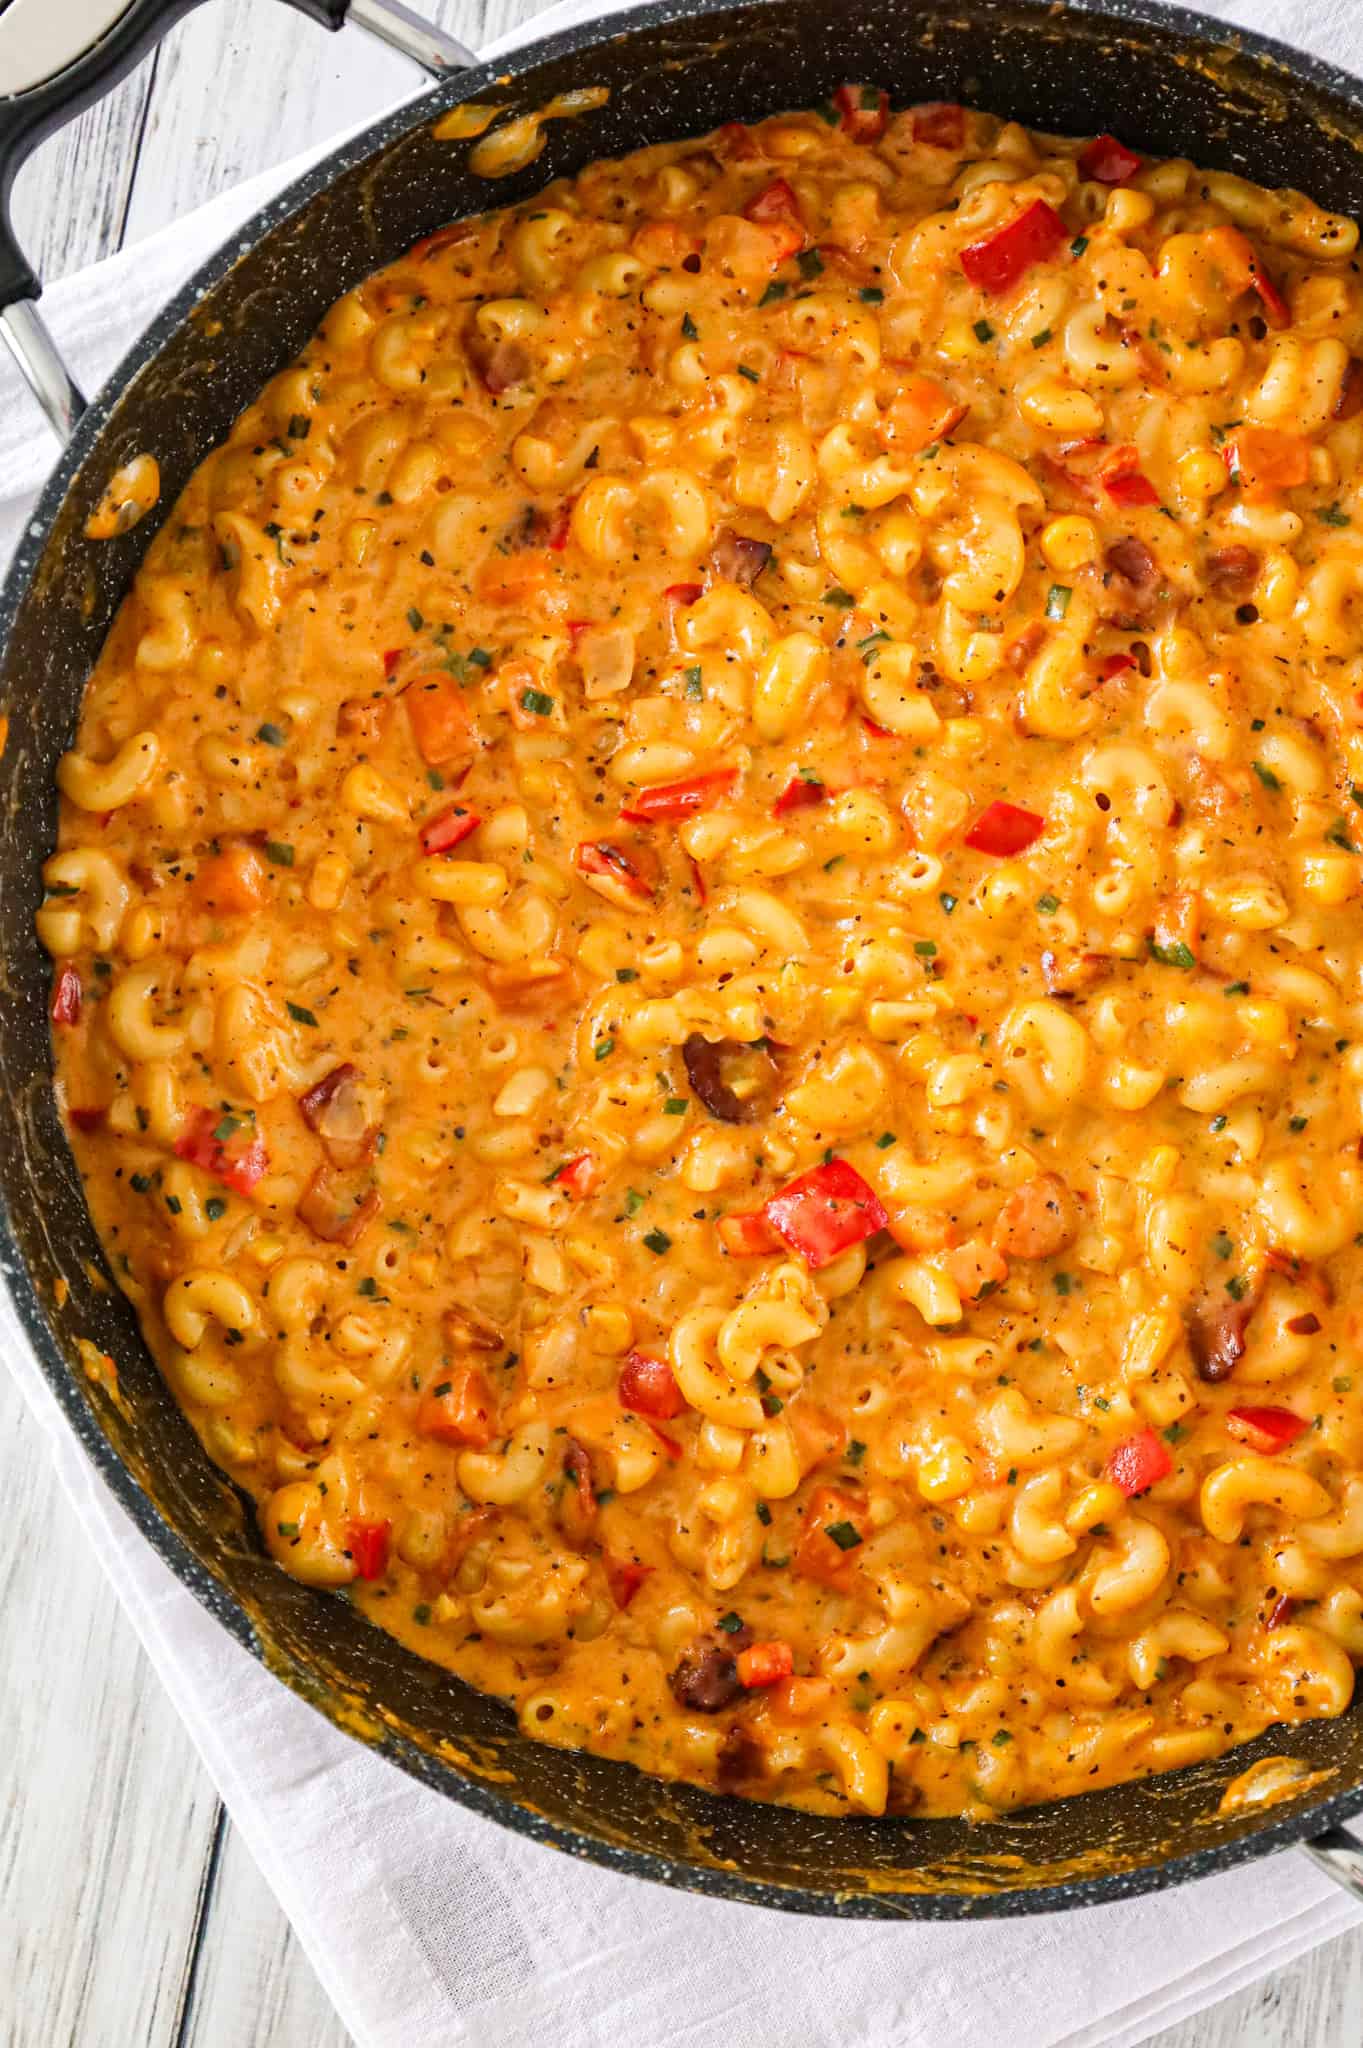 Cajun Mac and Cheese is a flavourful pasta recipe loaded with bacon, sweet potato, red bell peppers, Cajun seasoning, cheddar and Monterey Jack.